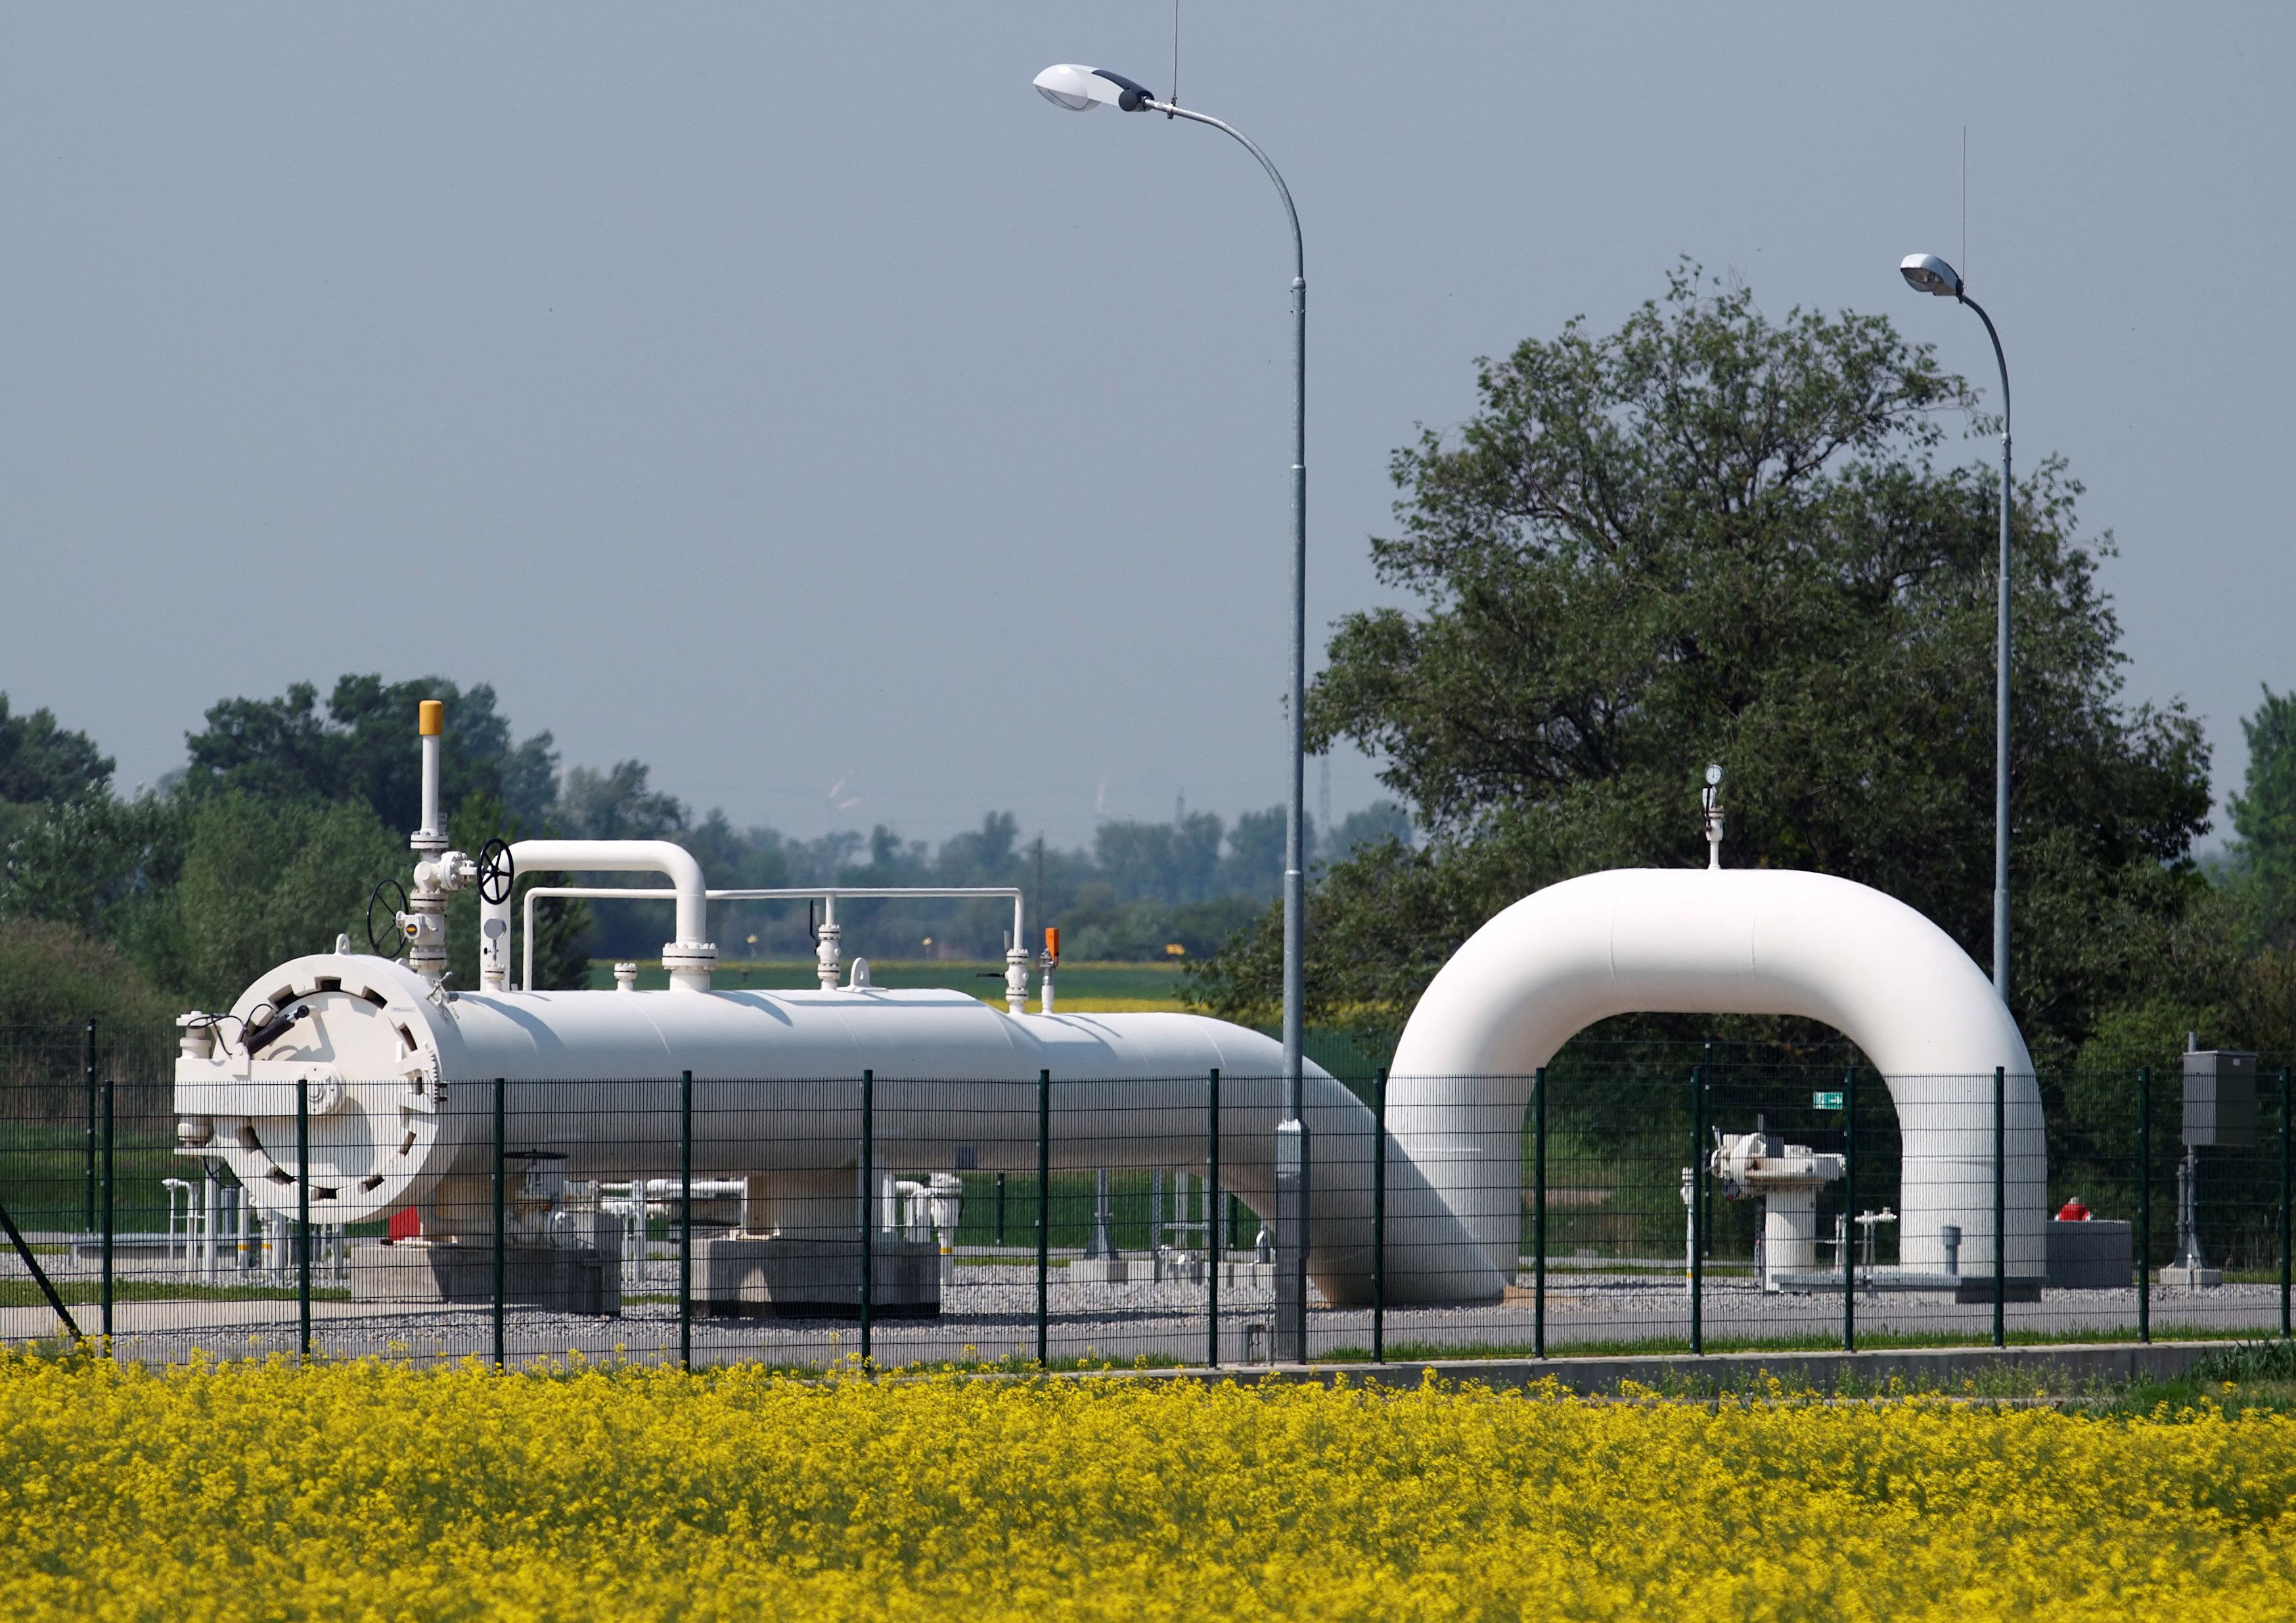 Gas pipes are pictured at Austria's largest natural gas import and distribution station in Baumgarten